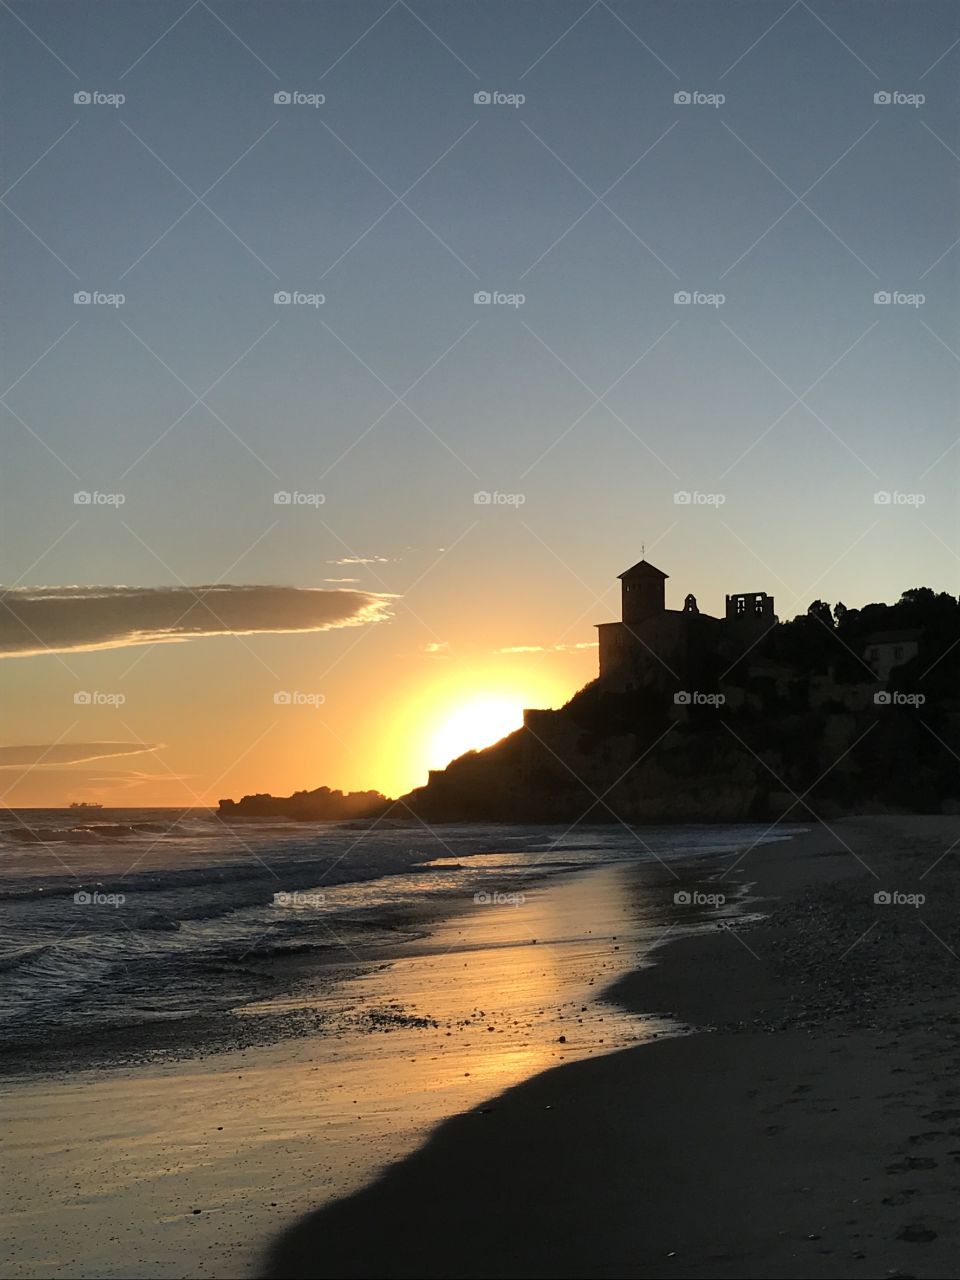 Winter sunset behind a castle